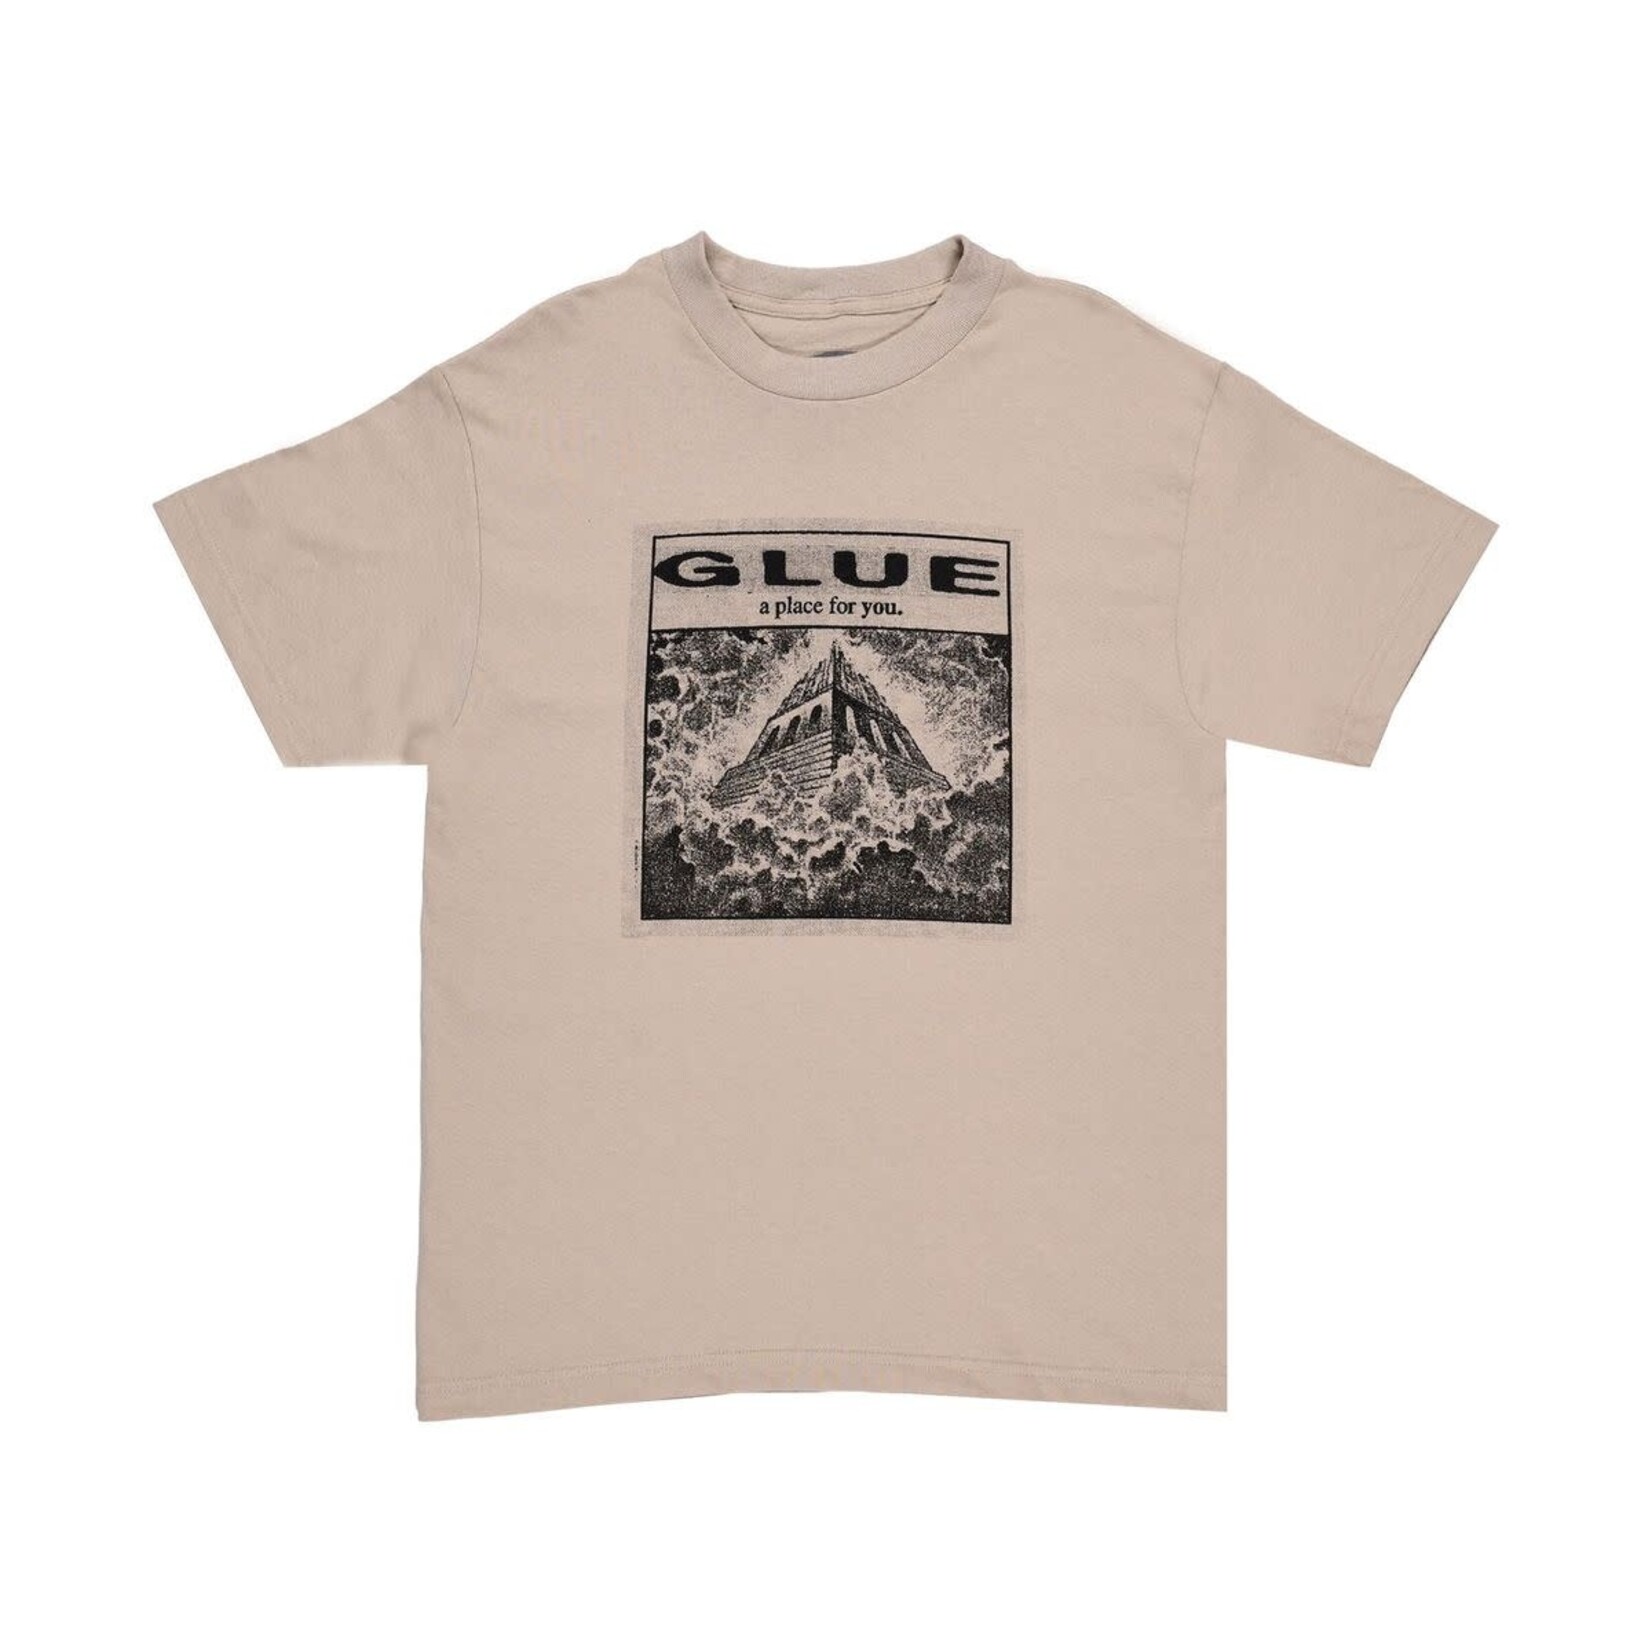 Glue Glue A Place For You Tee - Sand